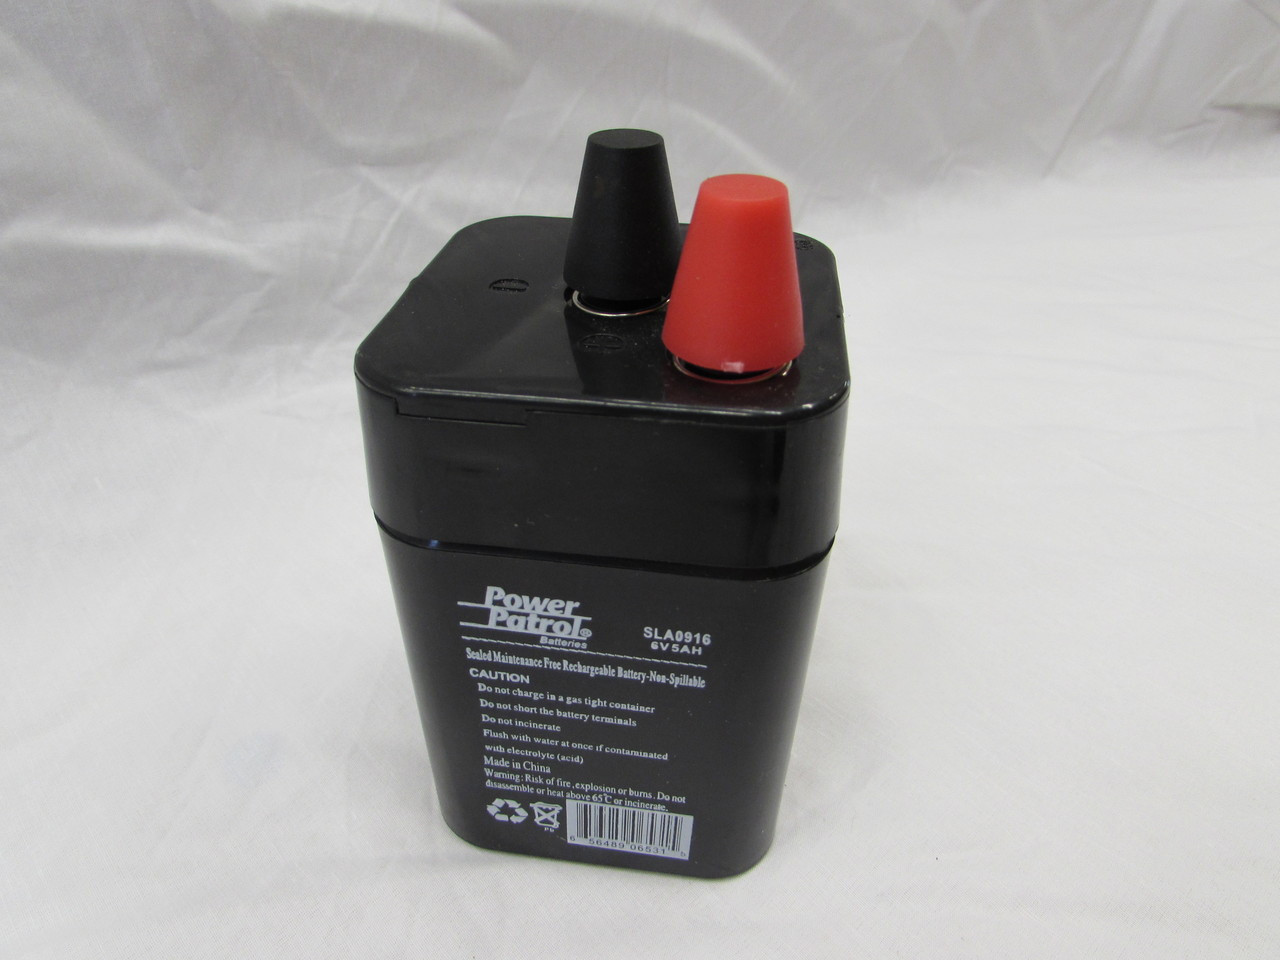 6 volt 5 amp/hour rechargable battery Spring terminal - Texas Direct  Hunting Products